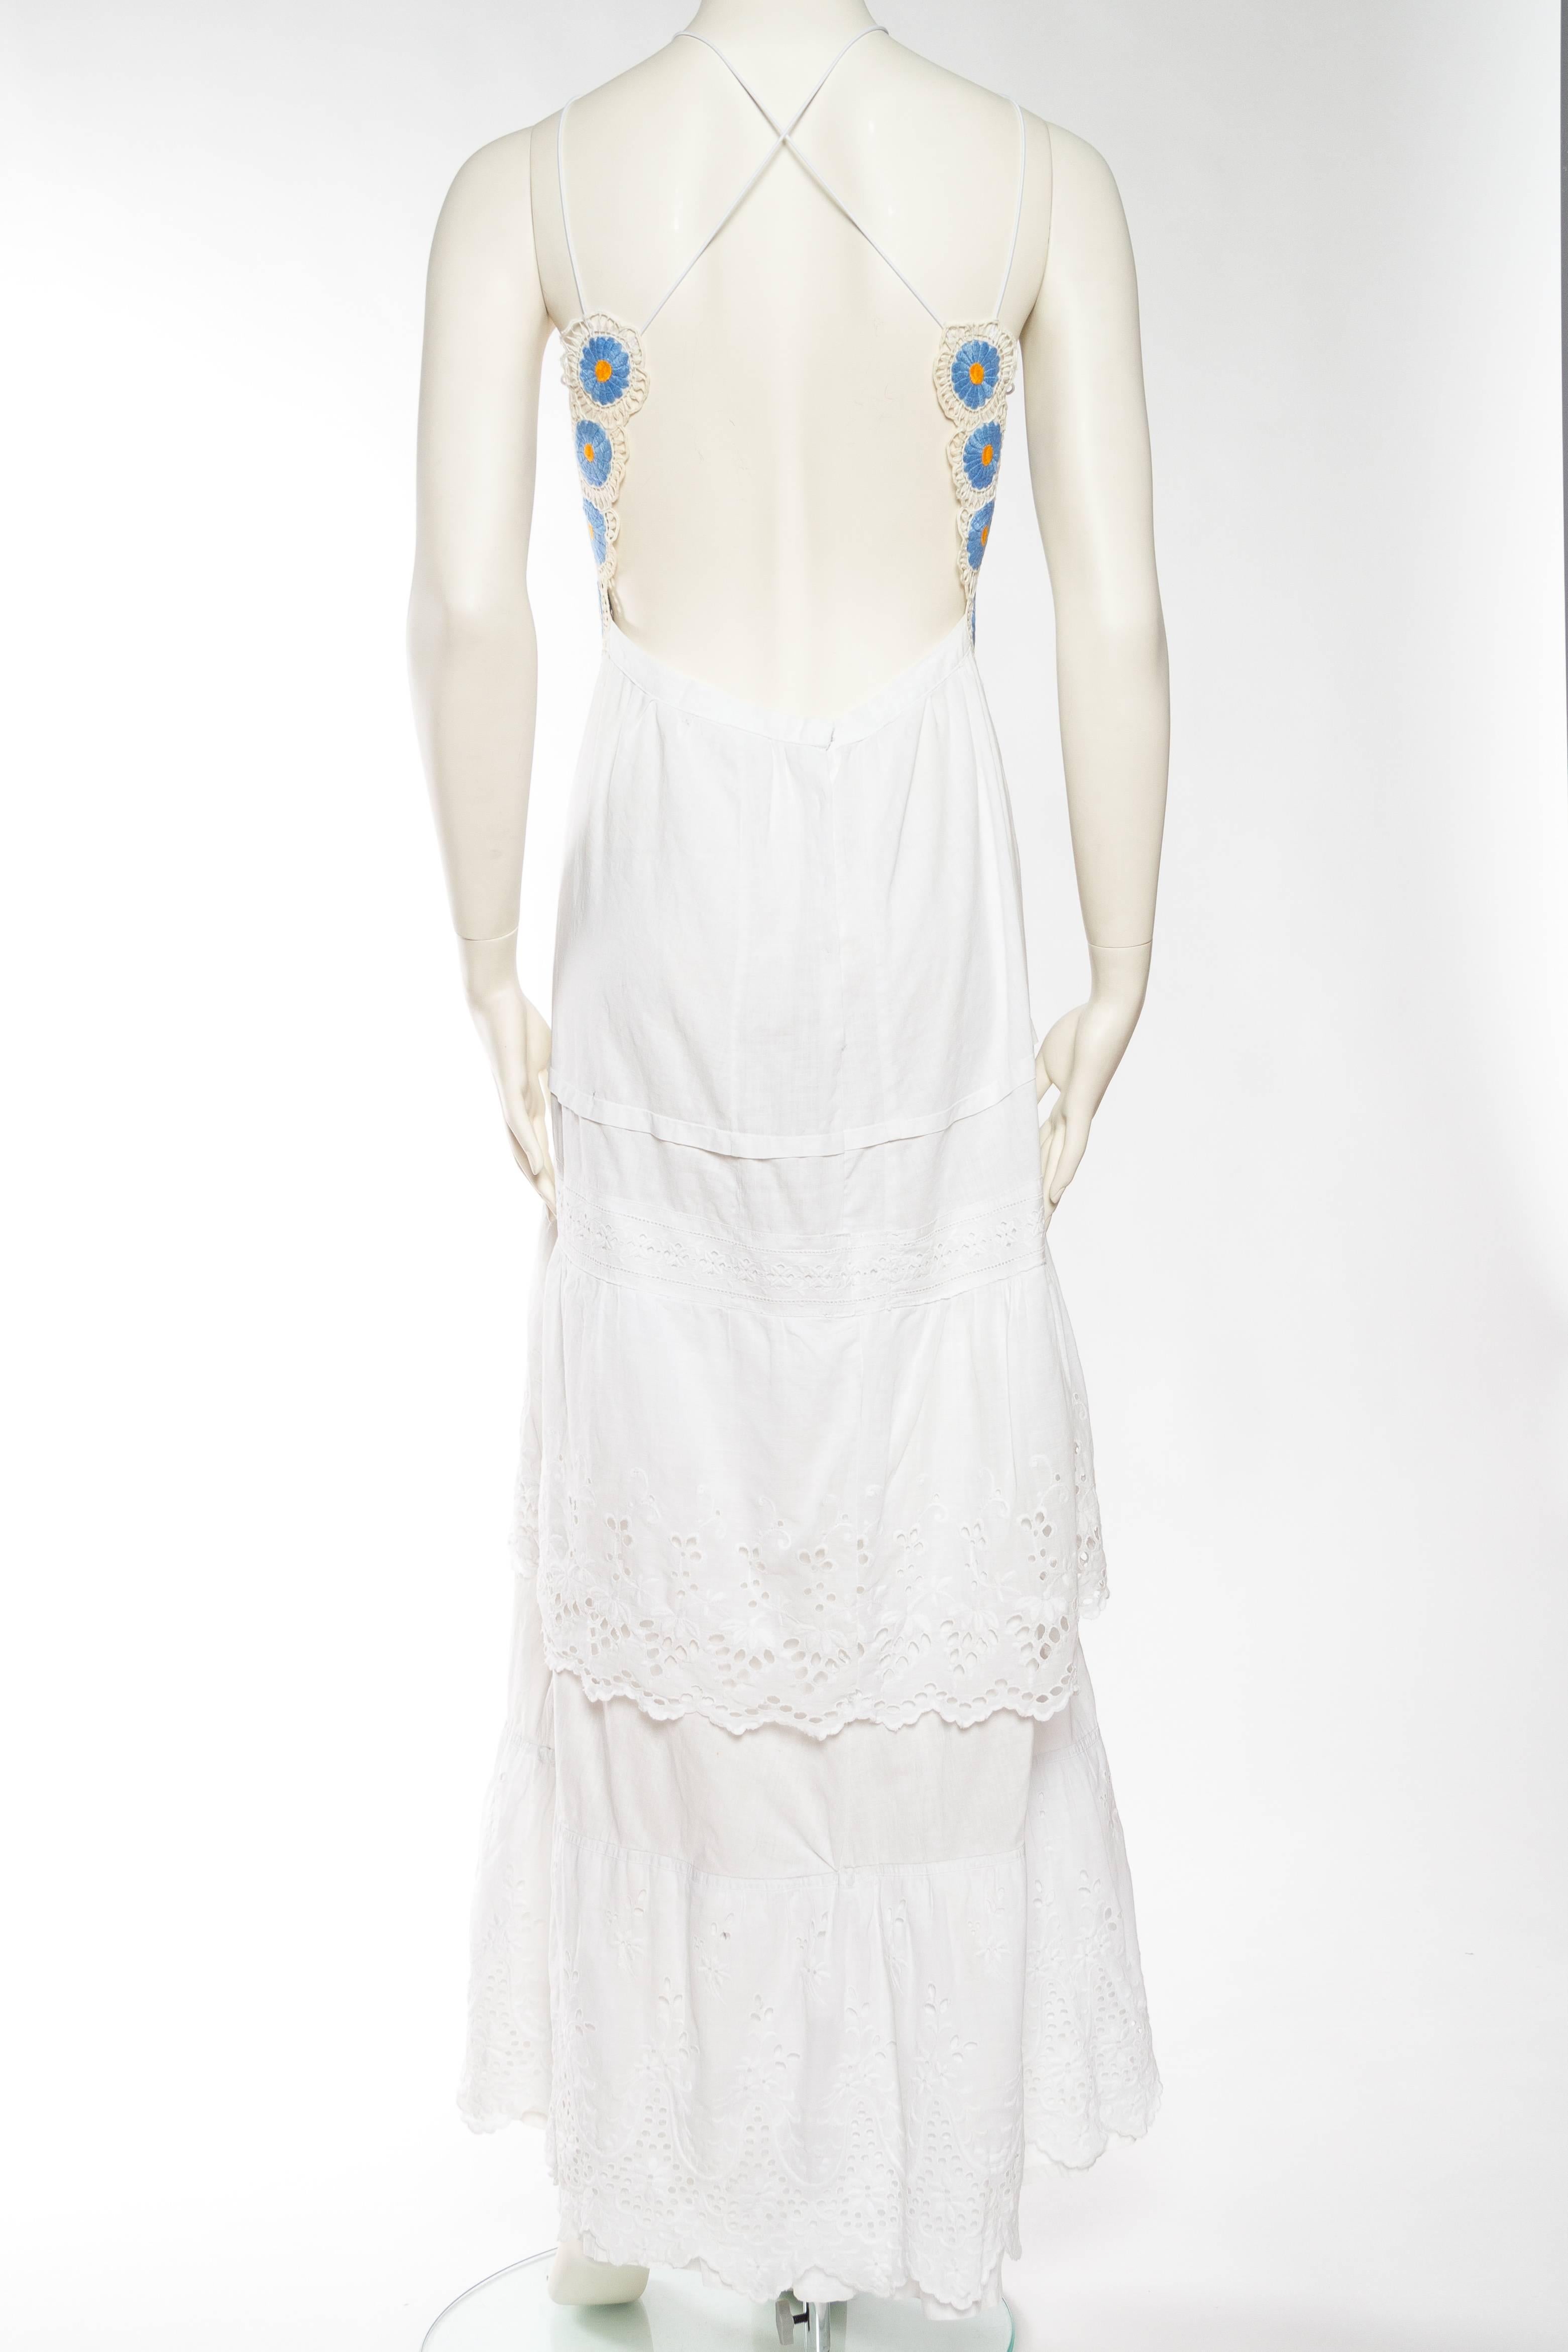 Hand Embroidered Eastern European and Victorian White Lace Dress 1